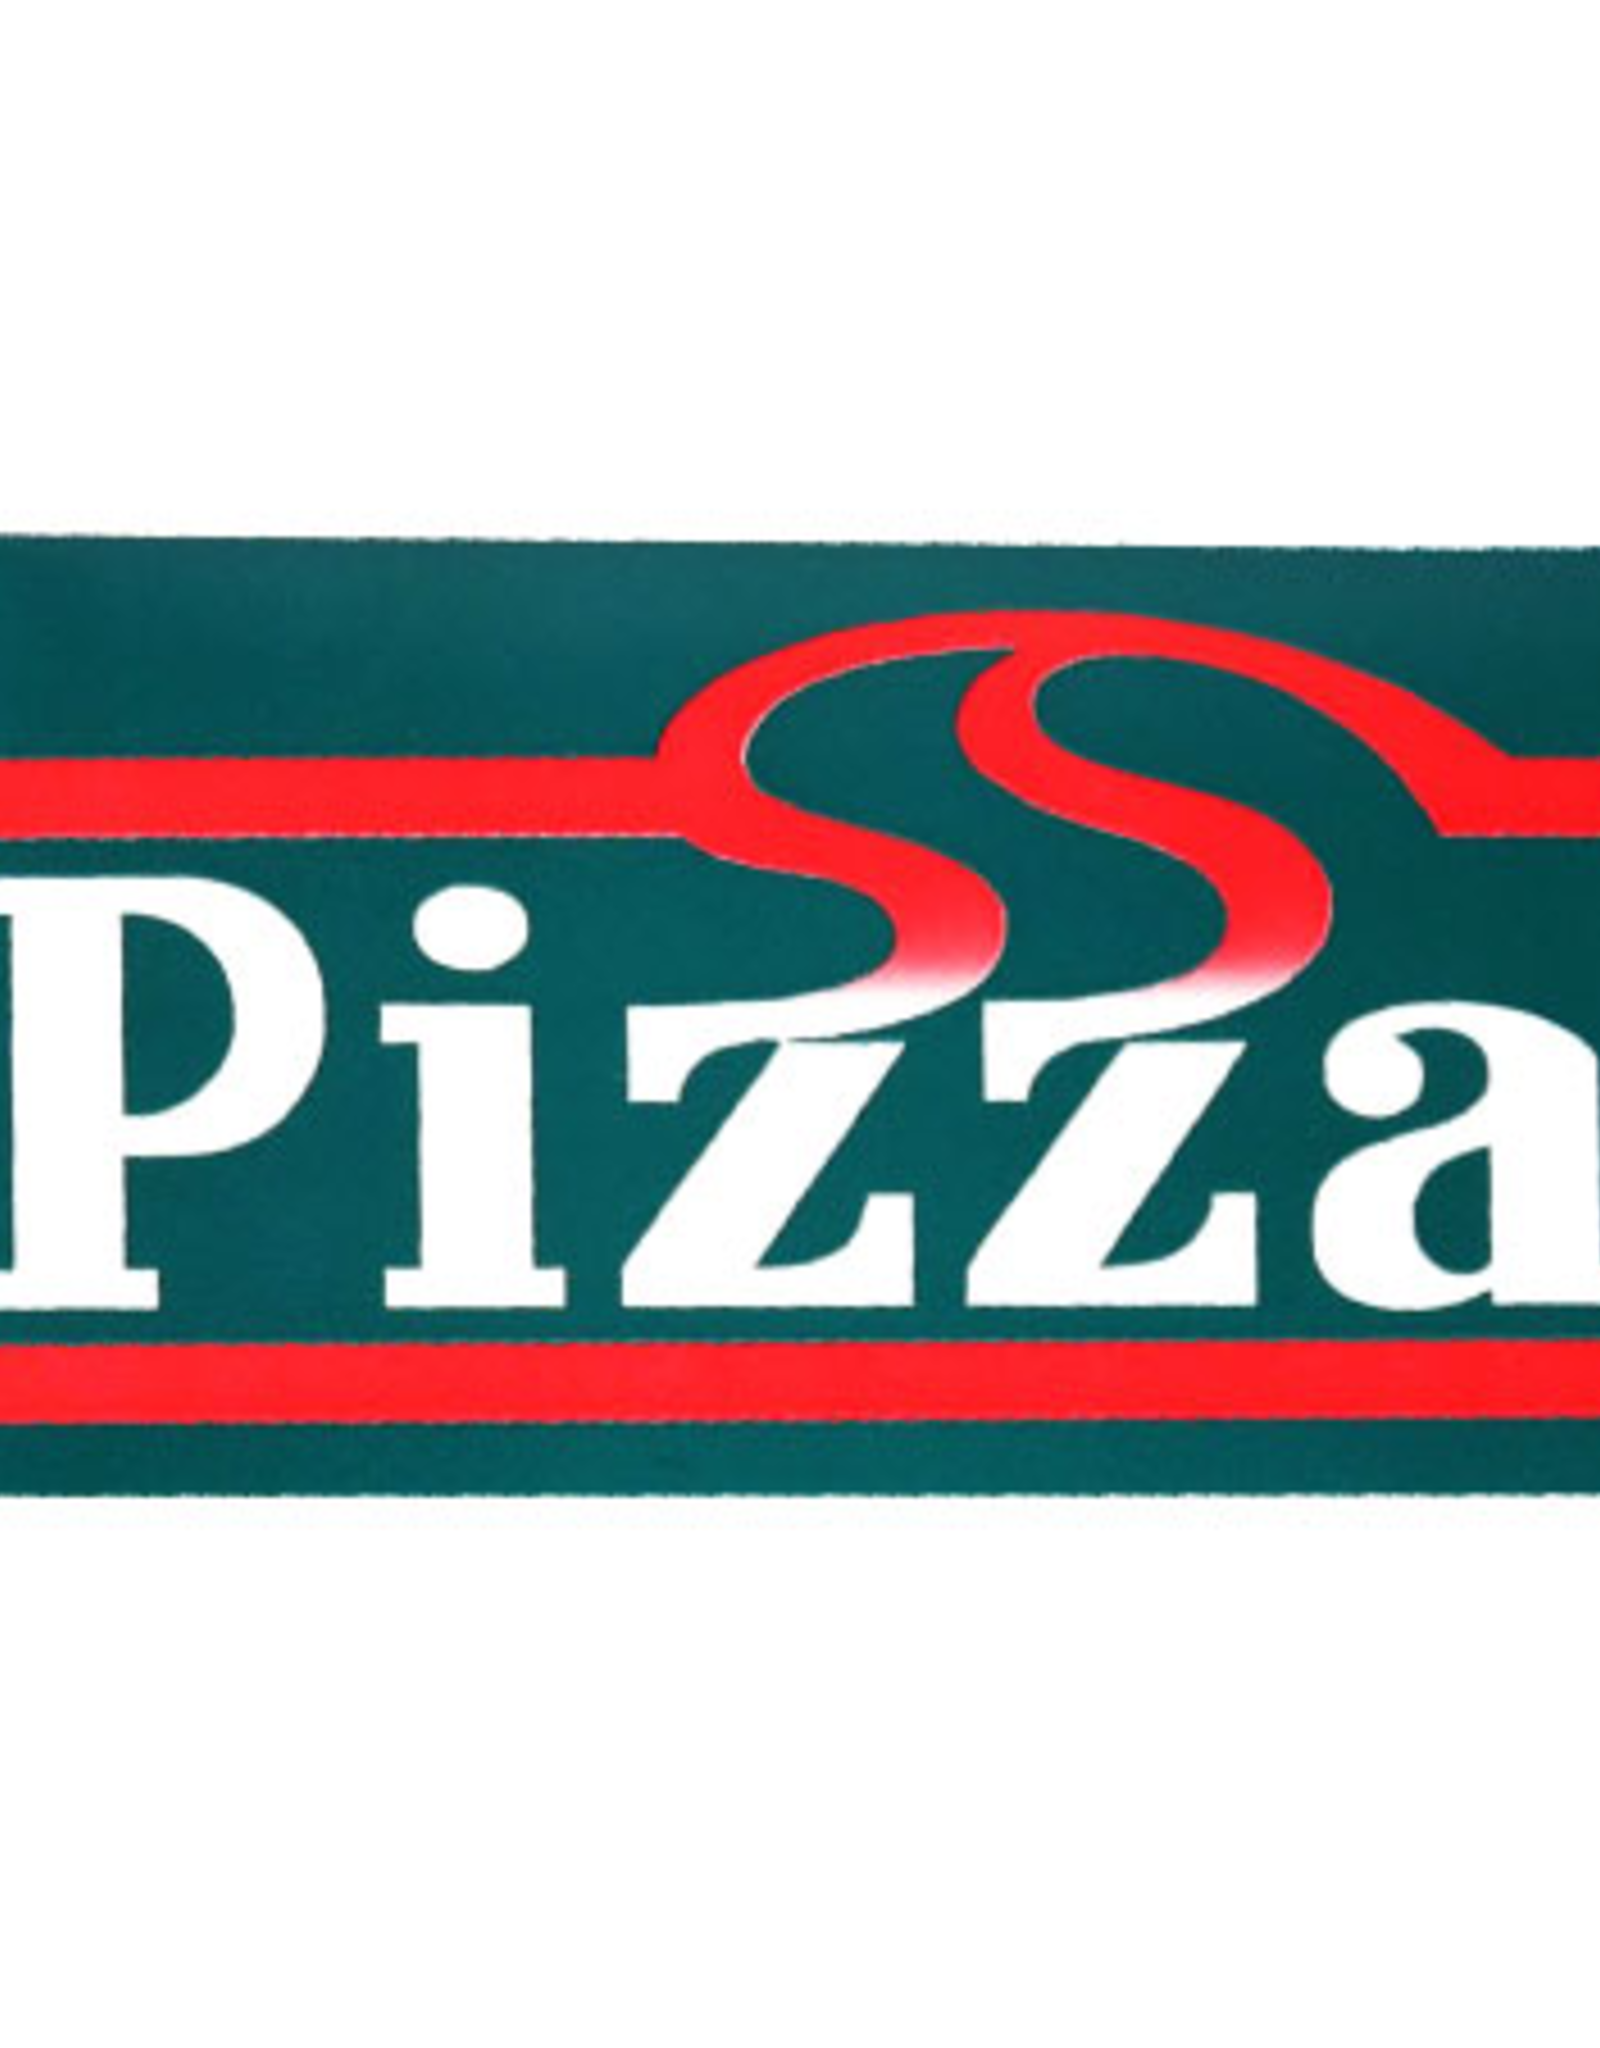 PIZZA PIZZA CARRY-OUT STICKER